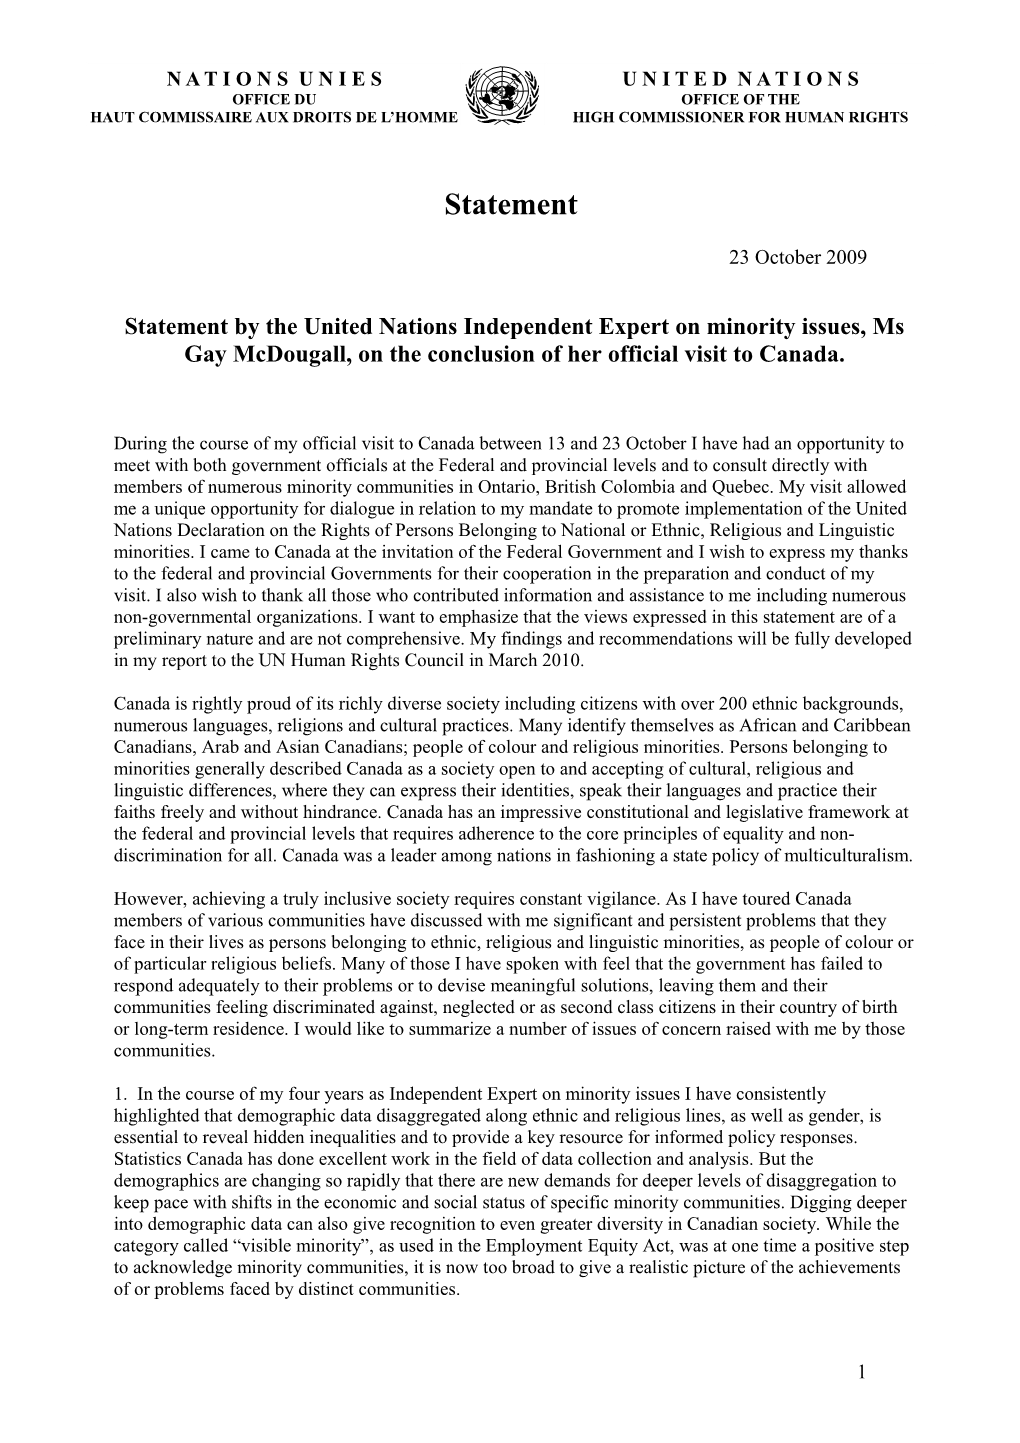 Statement by the United Nations Independent Expert on Minority Issues, Ms Gay Mcdougall